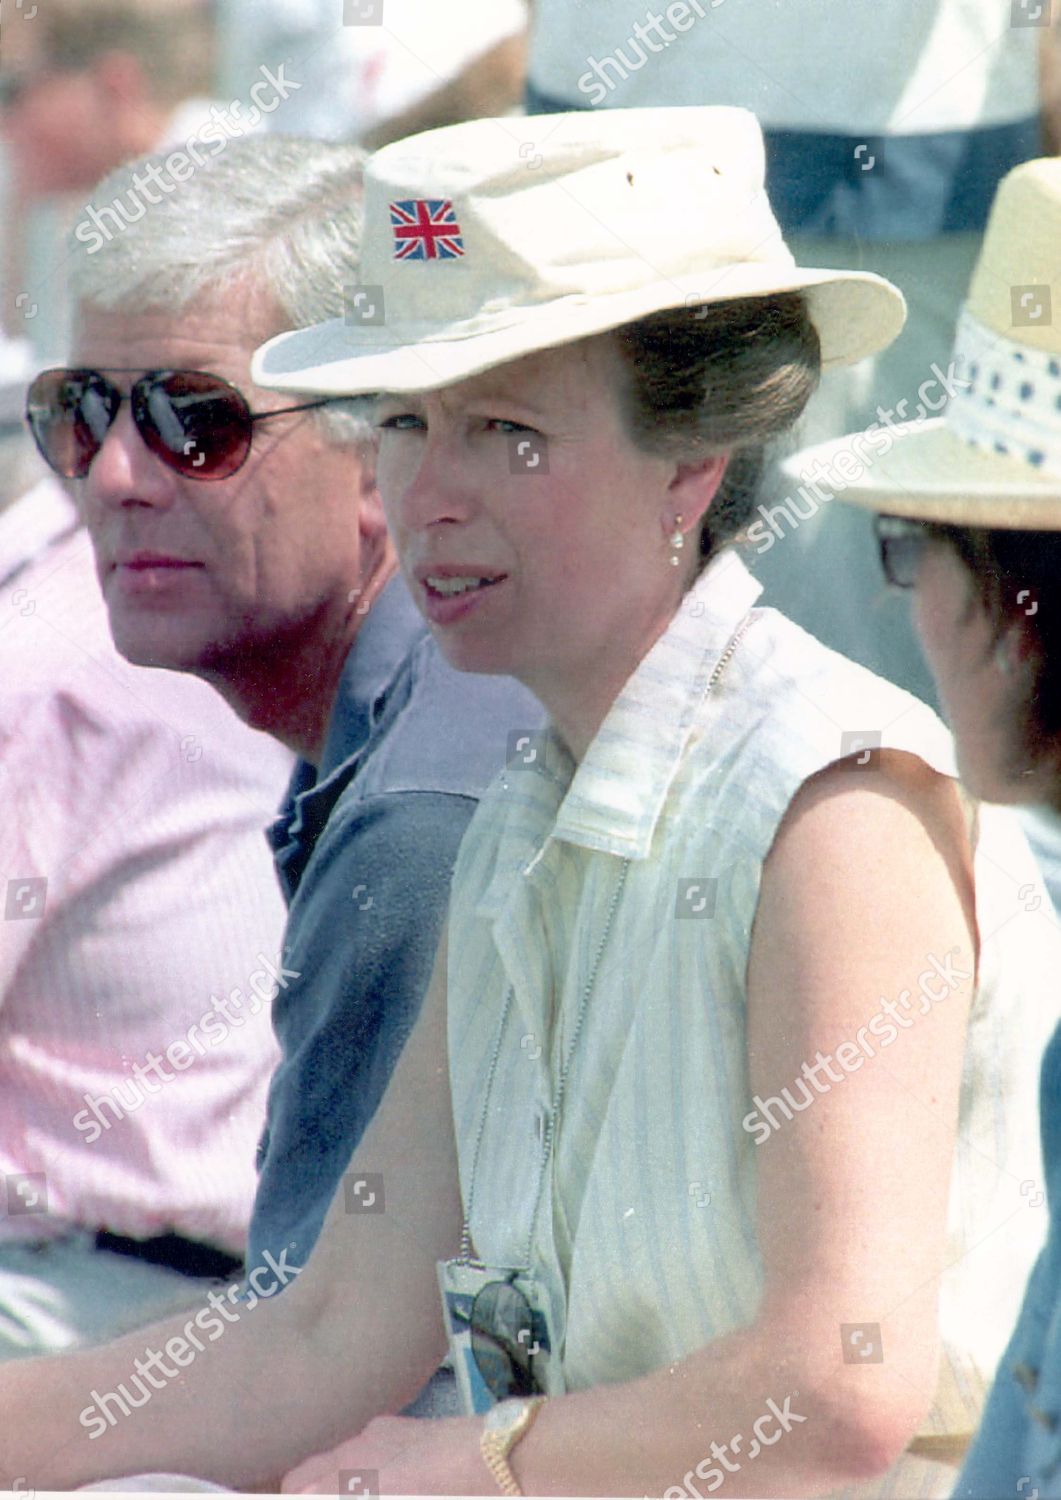 princess-anne-the-princess-royal-pictured-watching-an-archery-competition-at-the-1992-summer-olympic-games-in-barcelona-shutterstock-editorial-1030430a.jpg